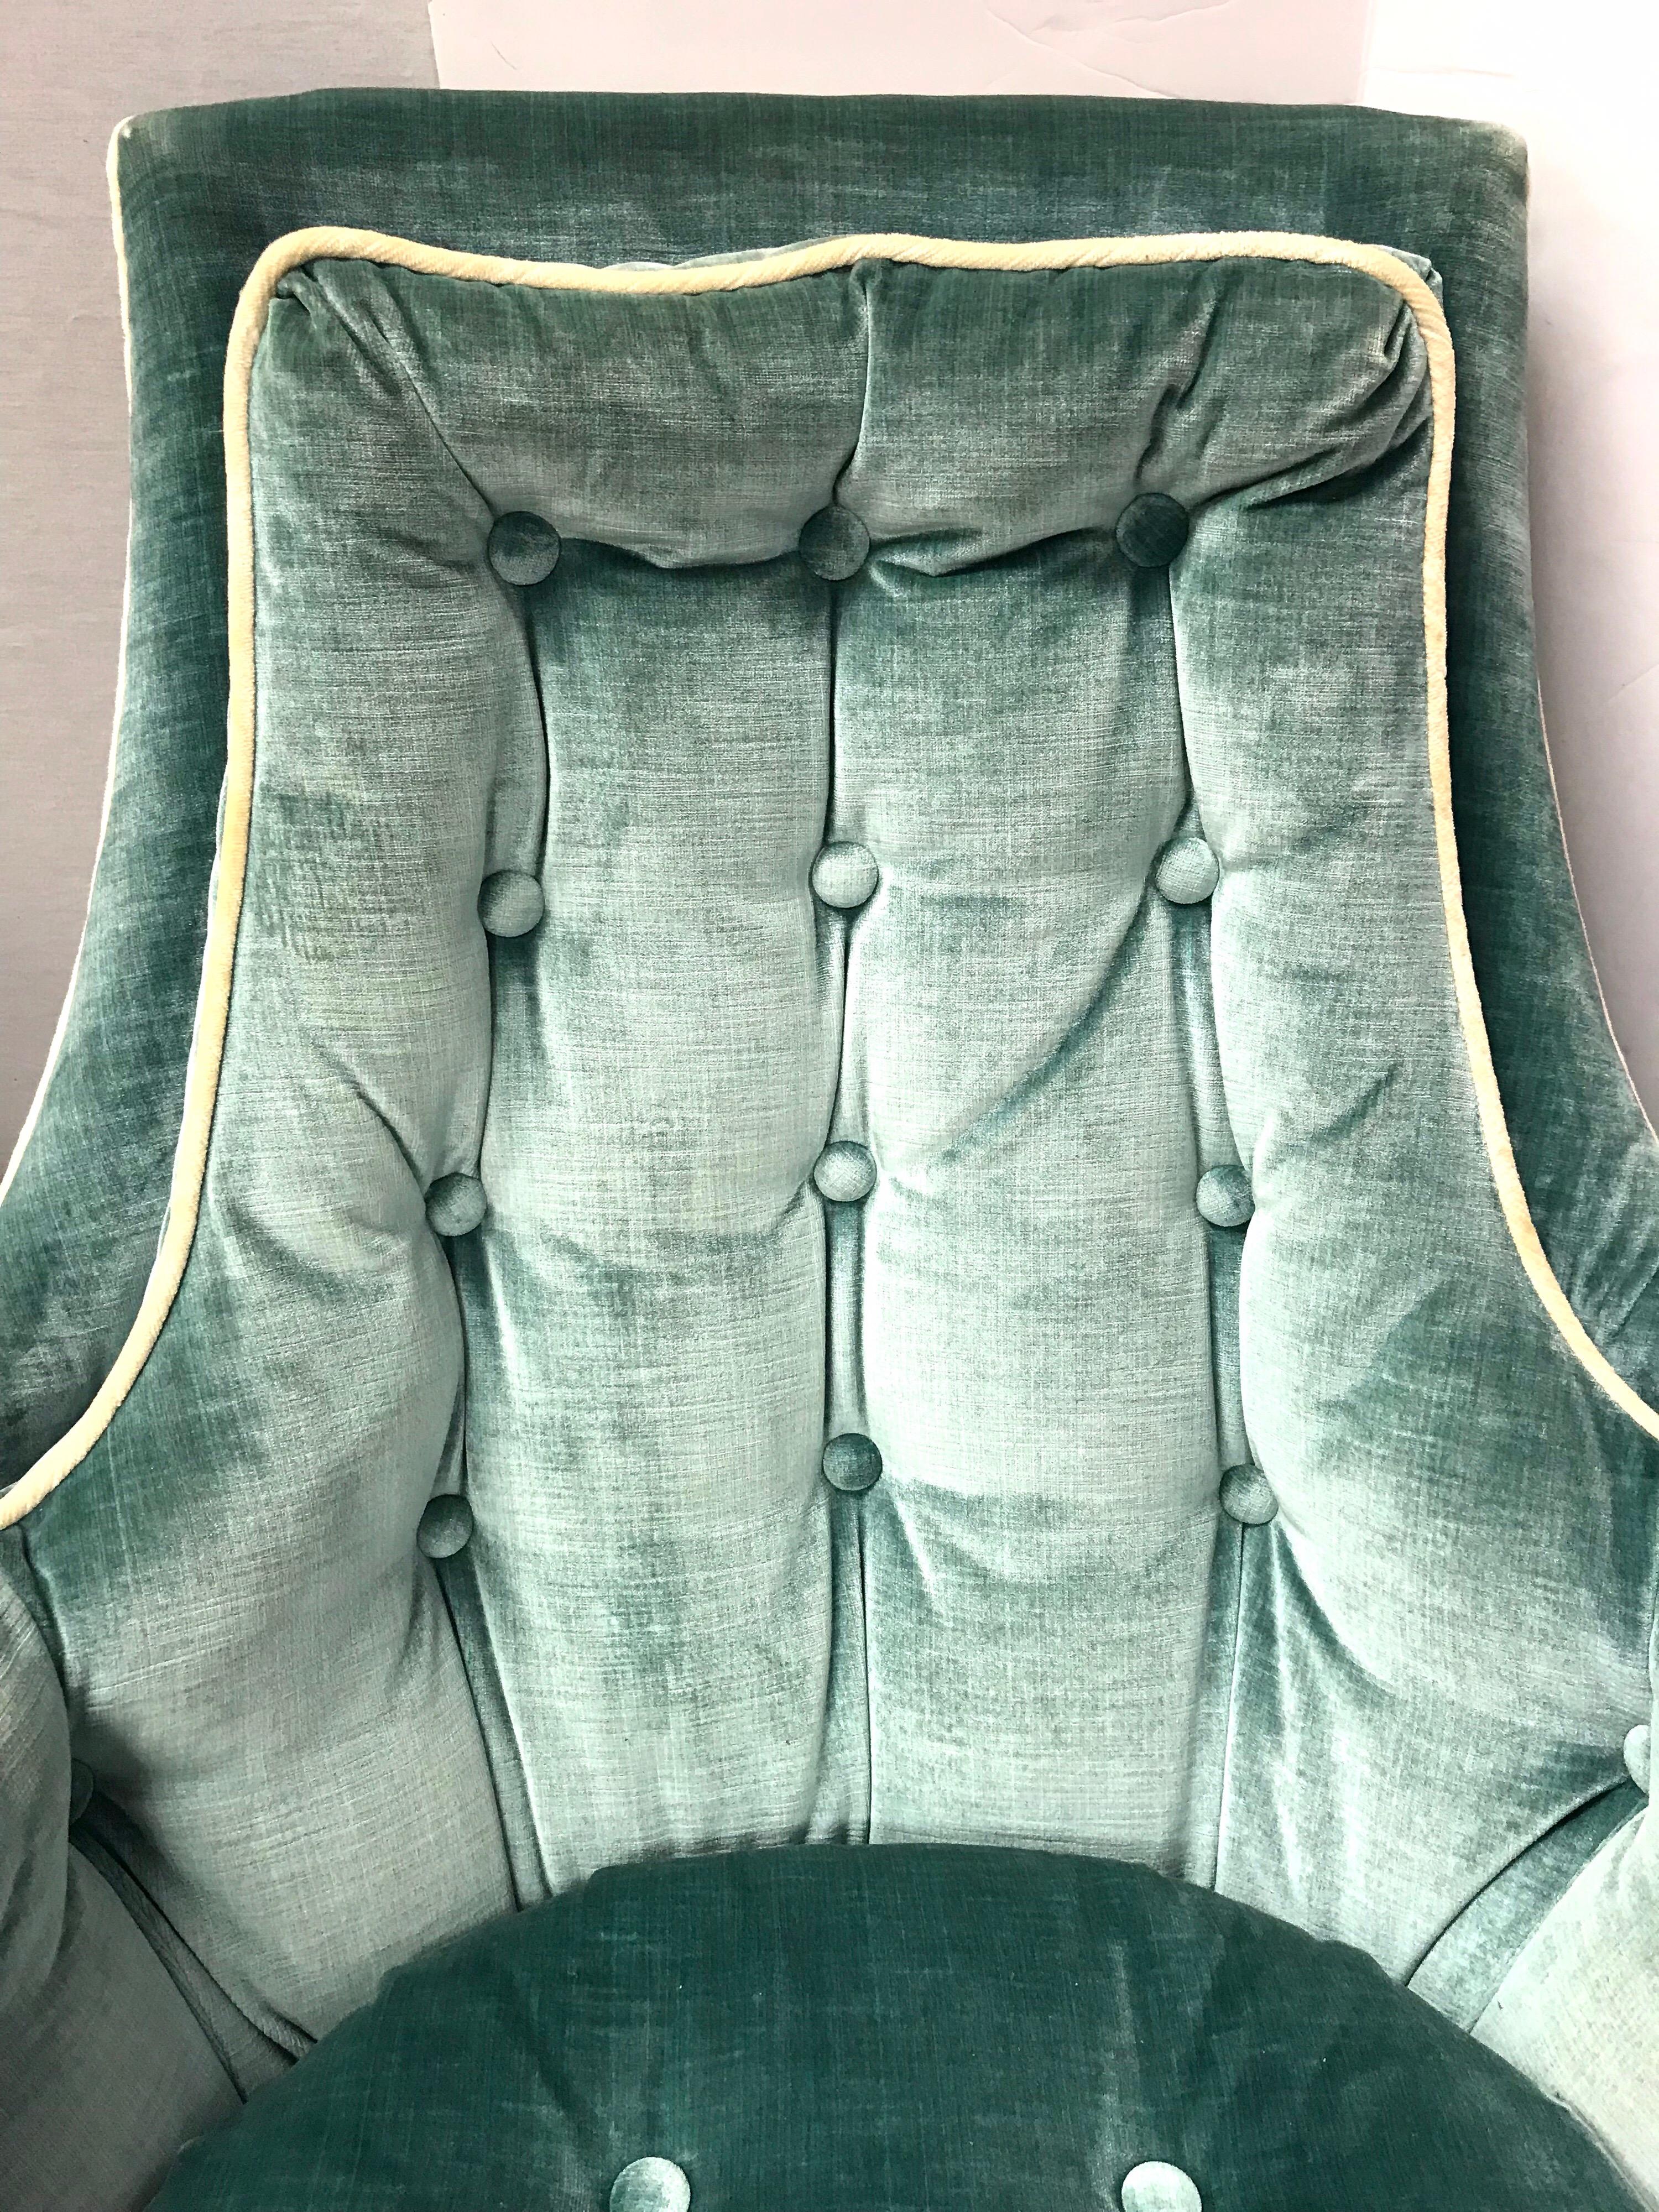 Midcentury 1960s velvet lounge chair with button tufted back and tufted seat in a beautiful robin’s egg blue color. Chair rocks and swivel 360 degrees and is super comfortable.